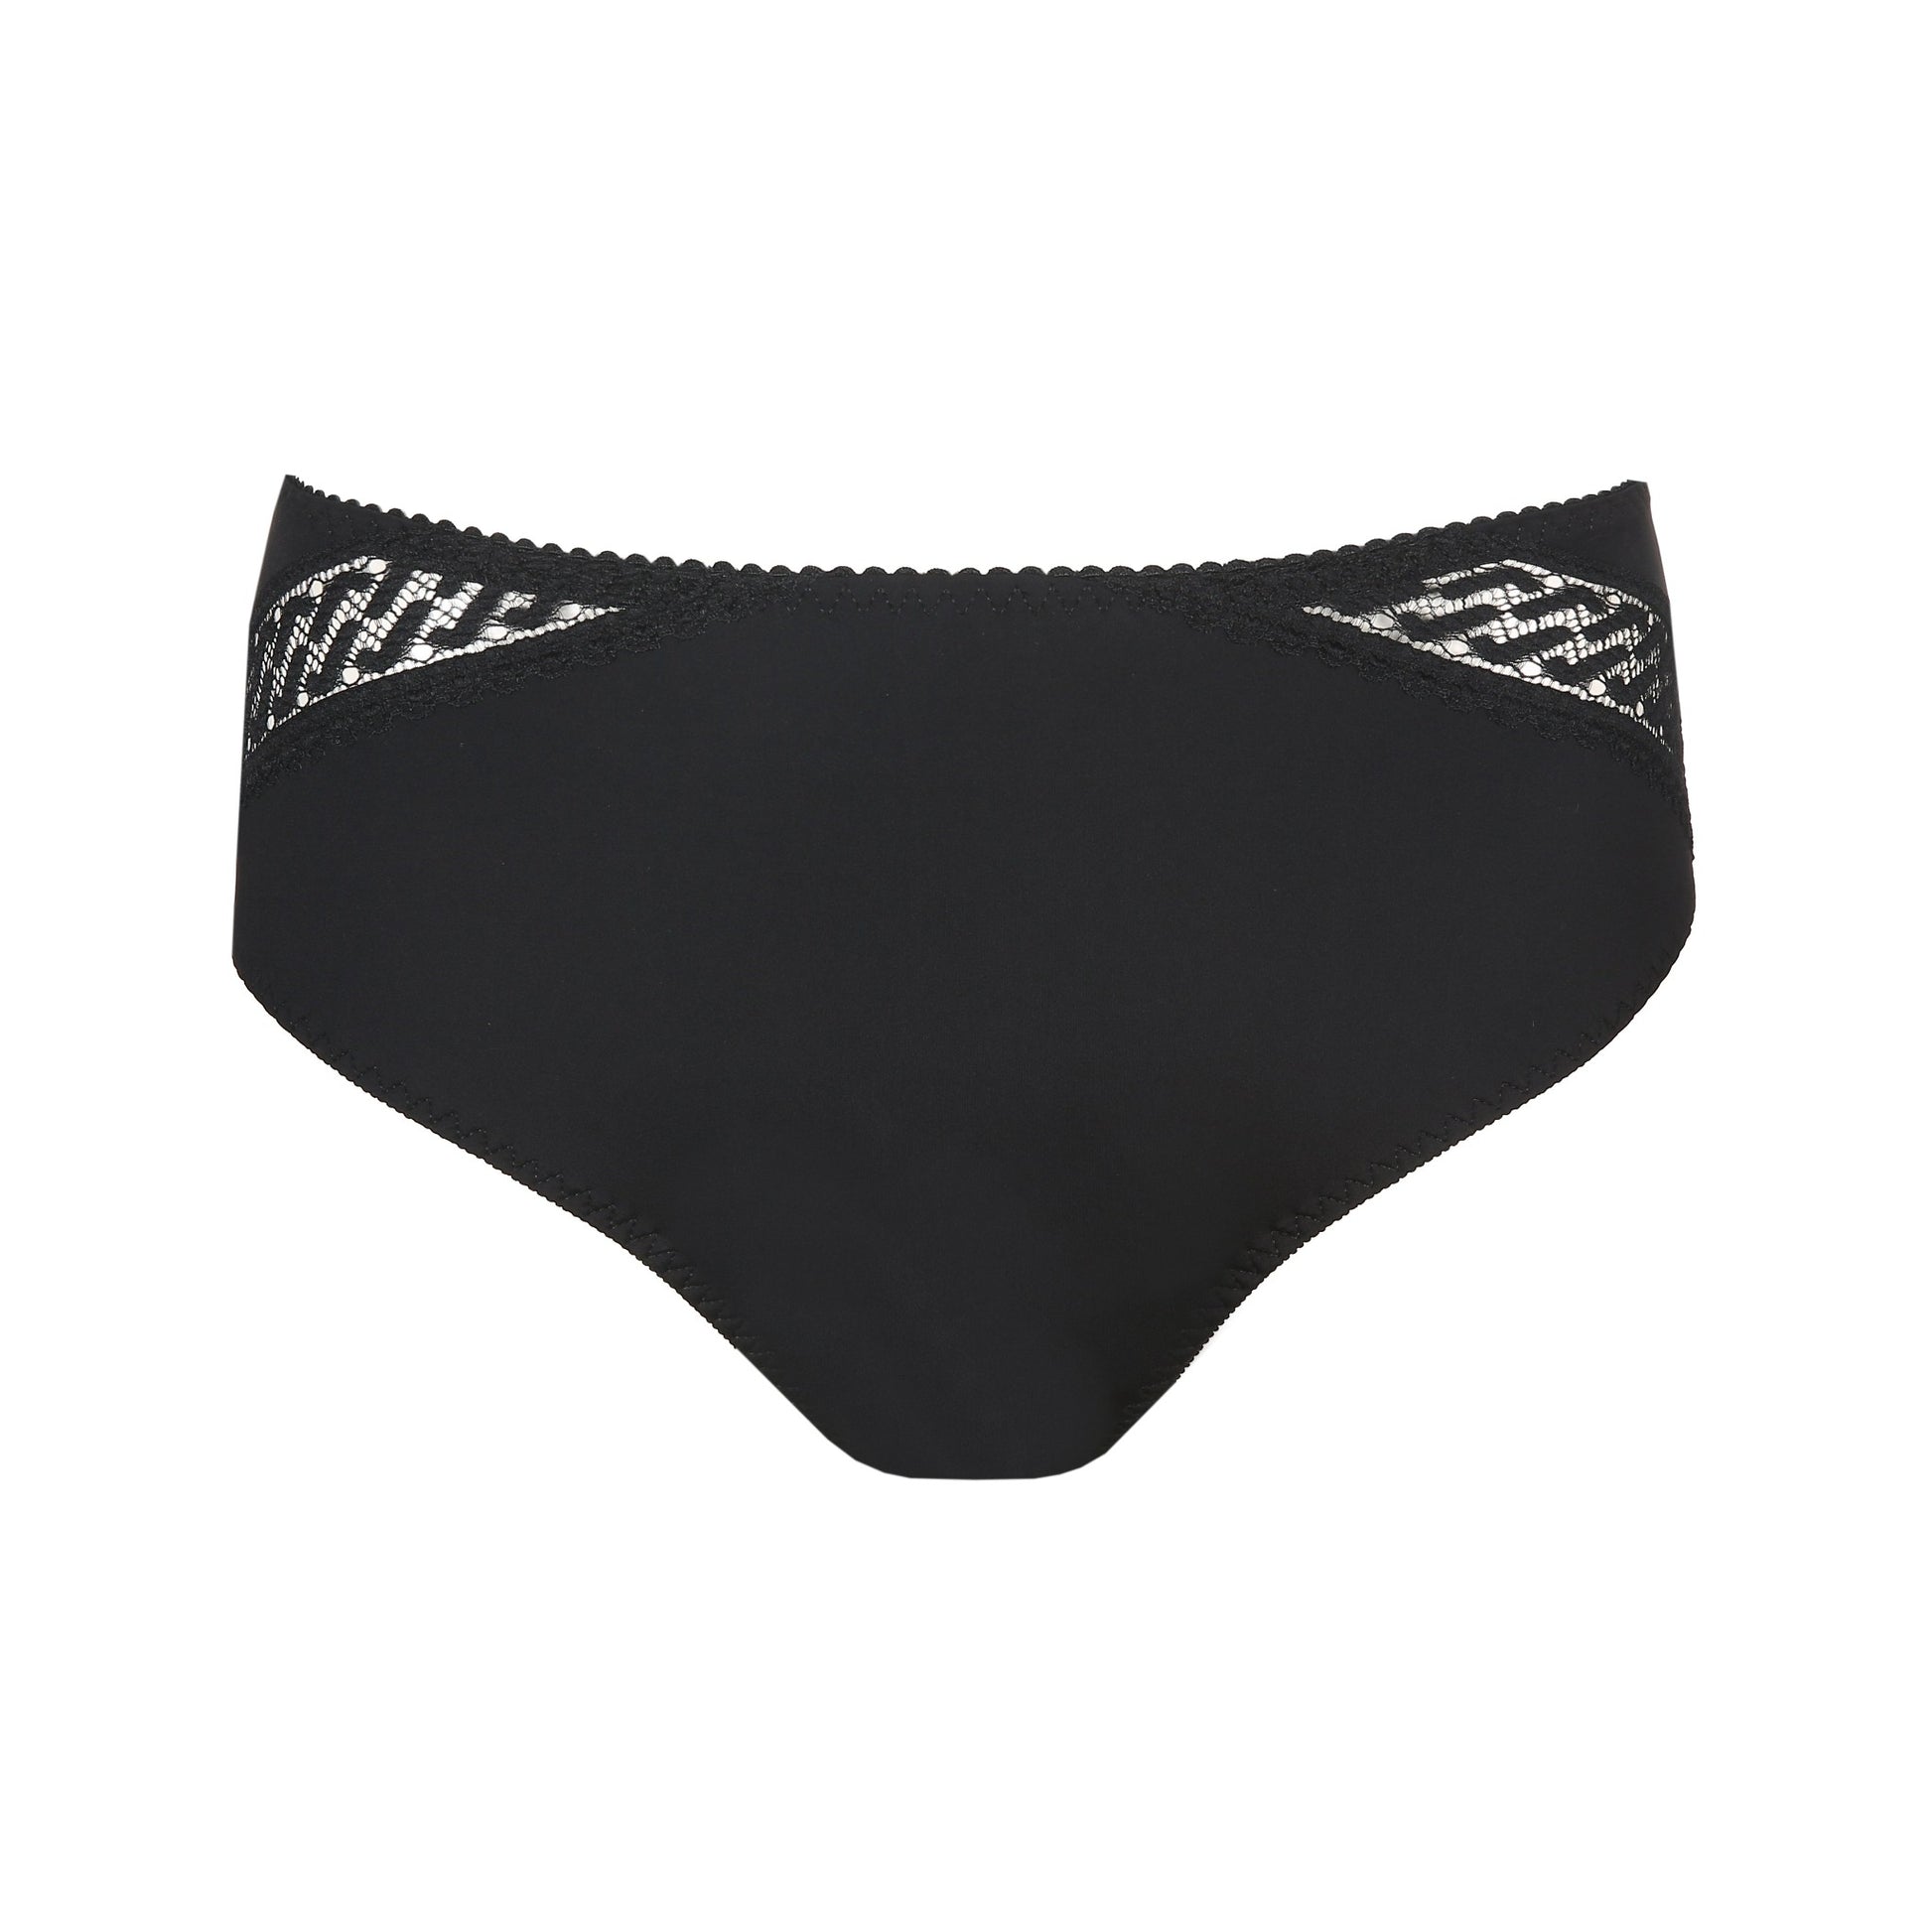 Front view of the Montara Full Brief panty in Black designed by PrimaDonna.